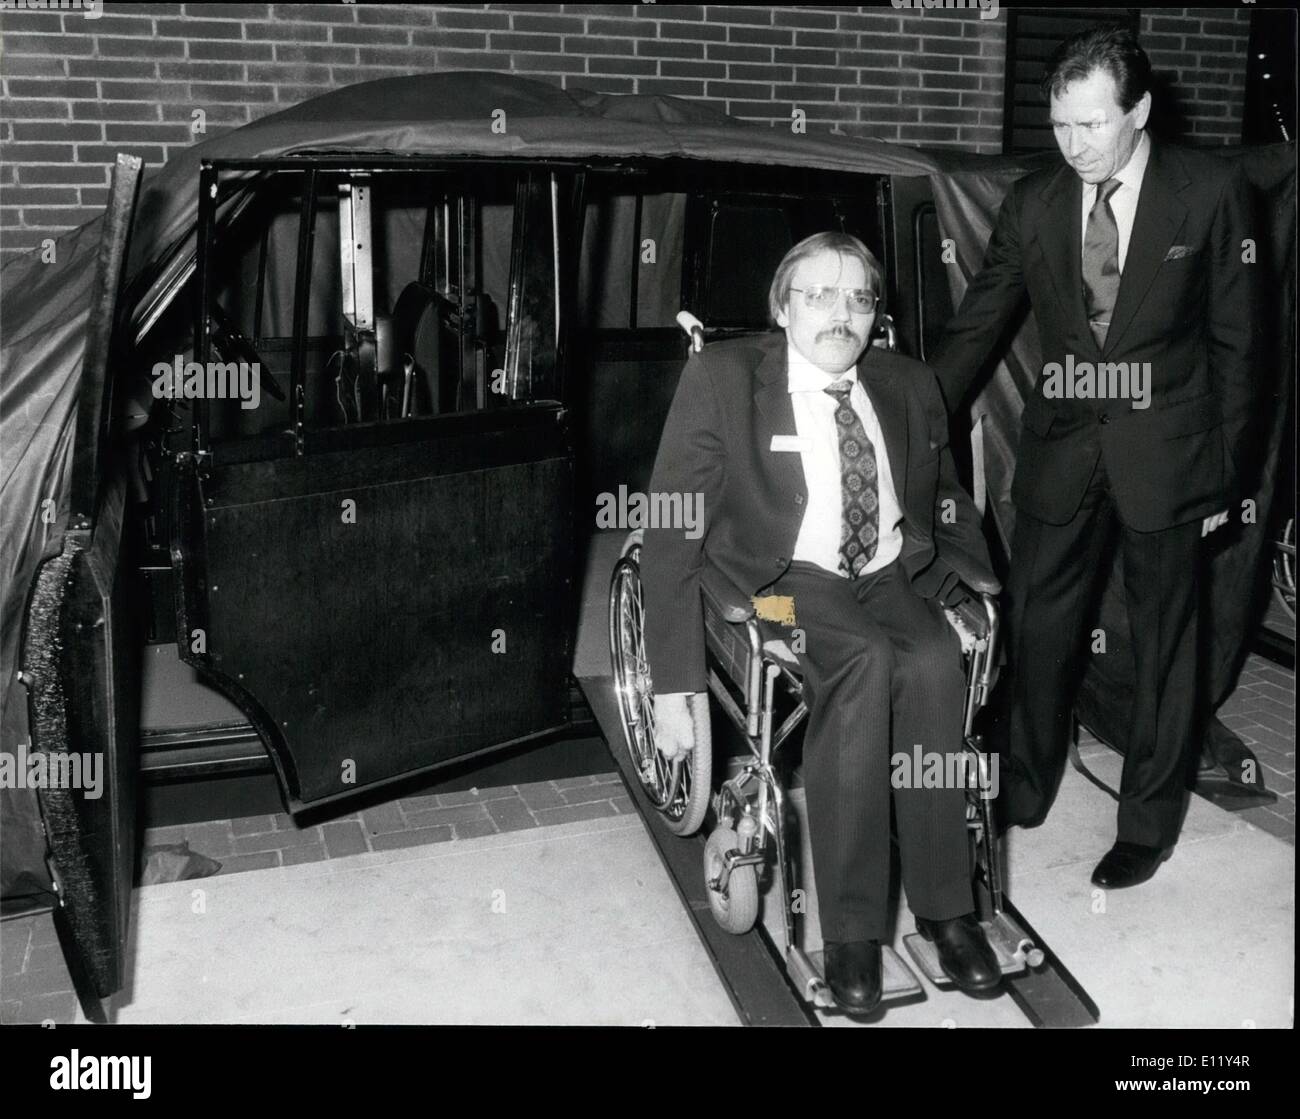 Mar. 03, 1981 - Snowdon at Transport Without Handicap Conference: The Rt. Hon the Earl of Snowdon President of the International Year of the Disabled People today spoke at the opening of the one day National conference 'Transport Without Handicap' in the Great Hall, Kensington Town Hall London W,8. 550 delegates representing transport operators and planners together with disabled transport users themselves met to discuss the special problems which disabled people face when using transport, and how transport can better be made to meet their needs. Picture Shows Taxi for the disabled Stock Photo